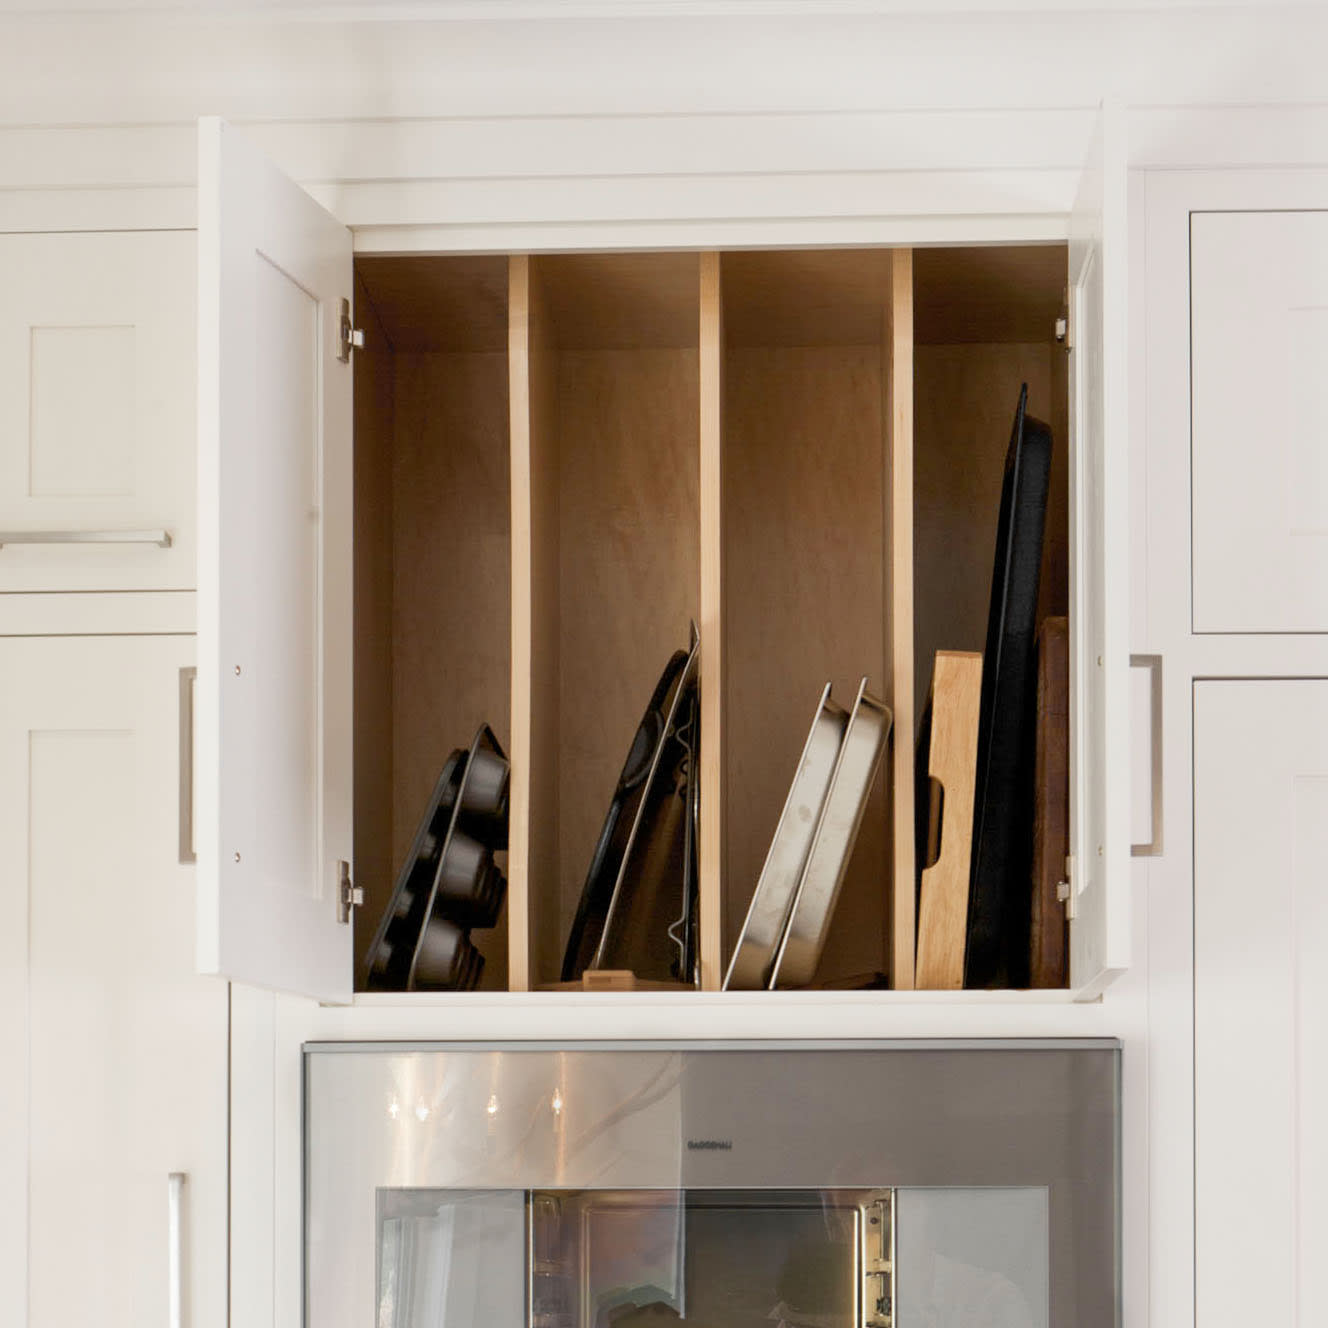 White kitchen cabinets with an over the stove storage cabinet with horizontal dividers for baking pans